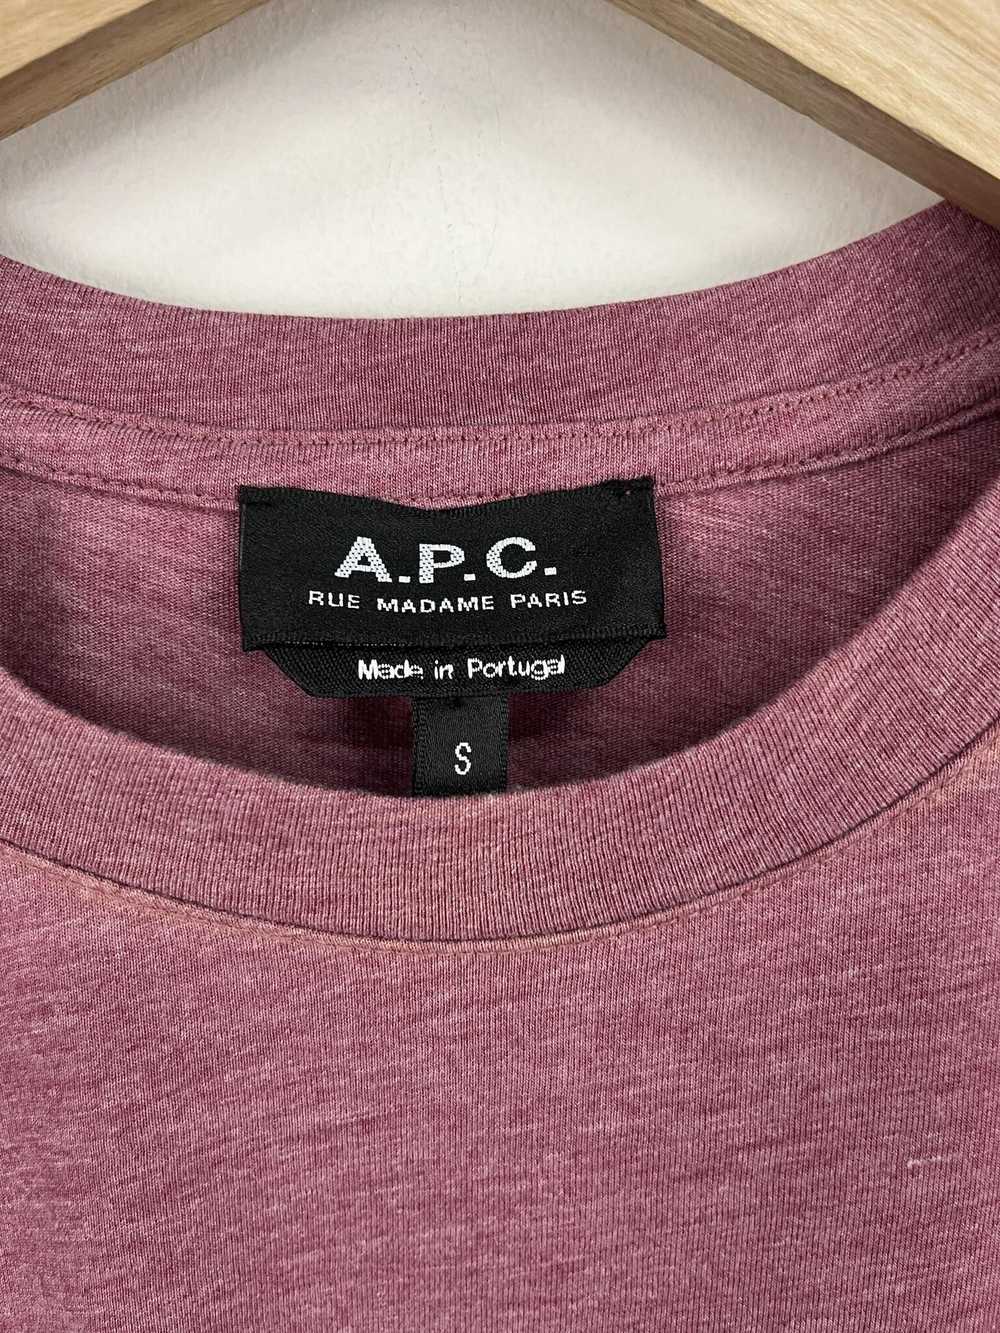 A.P.C. × Streetwear A.P.C. Chest Text Logo Tee - image 2